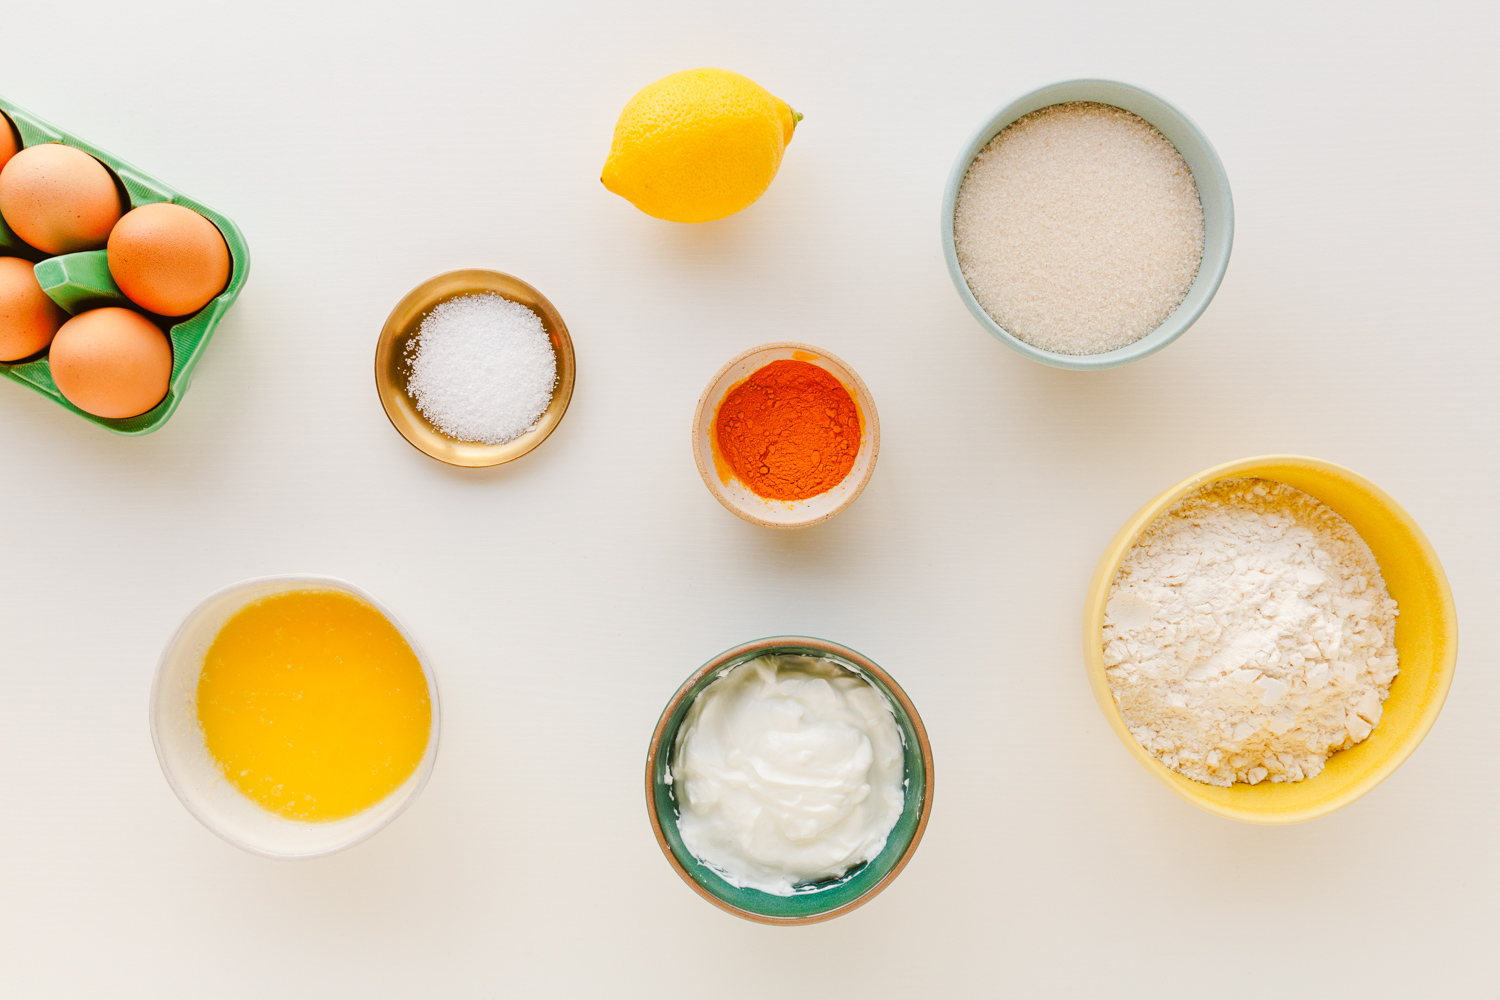 Ingredients for baking a cake